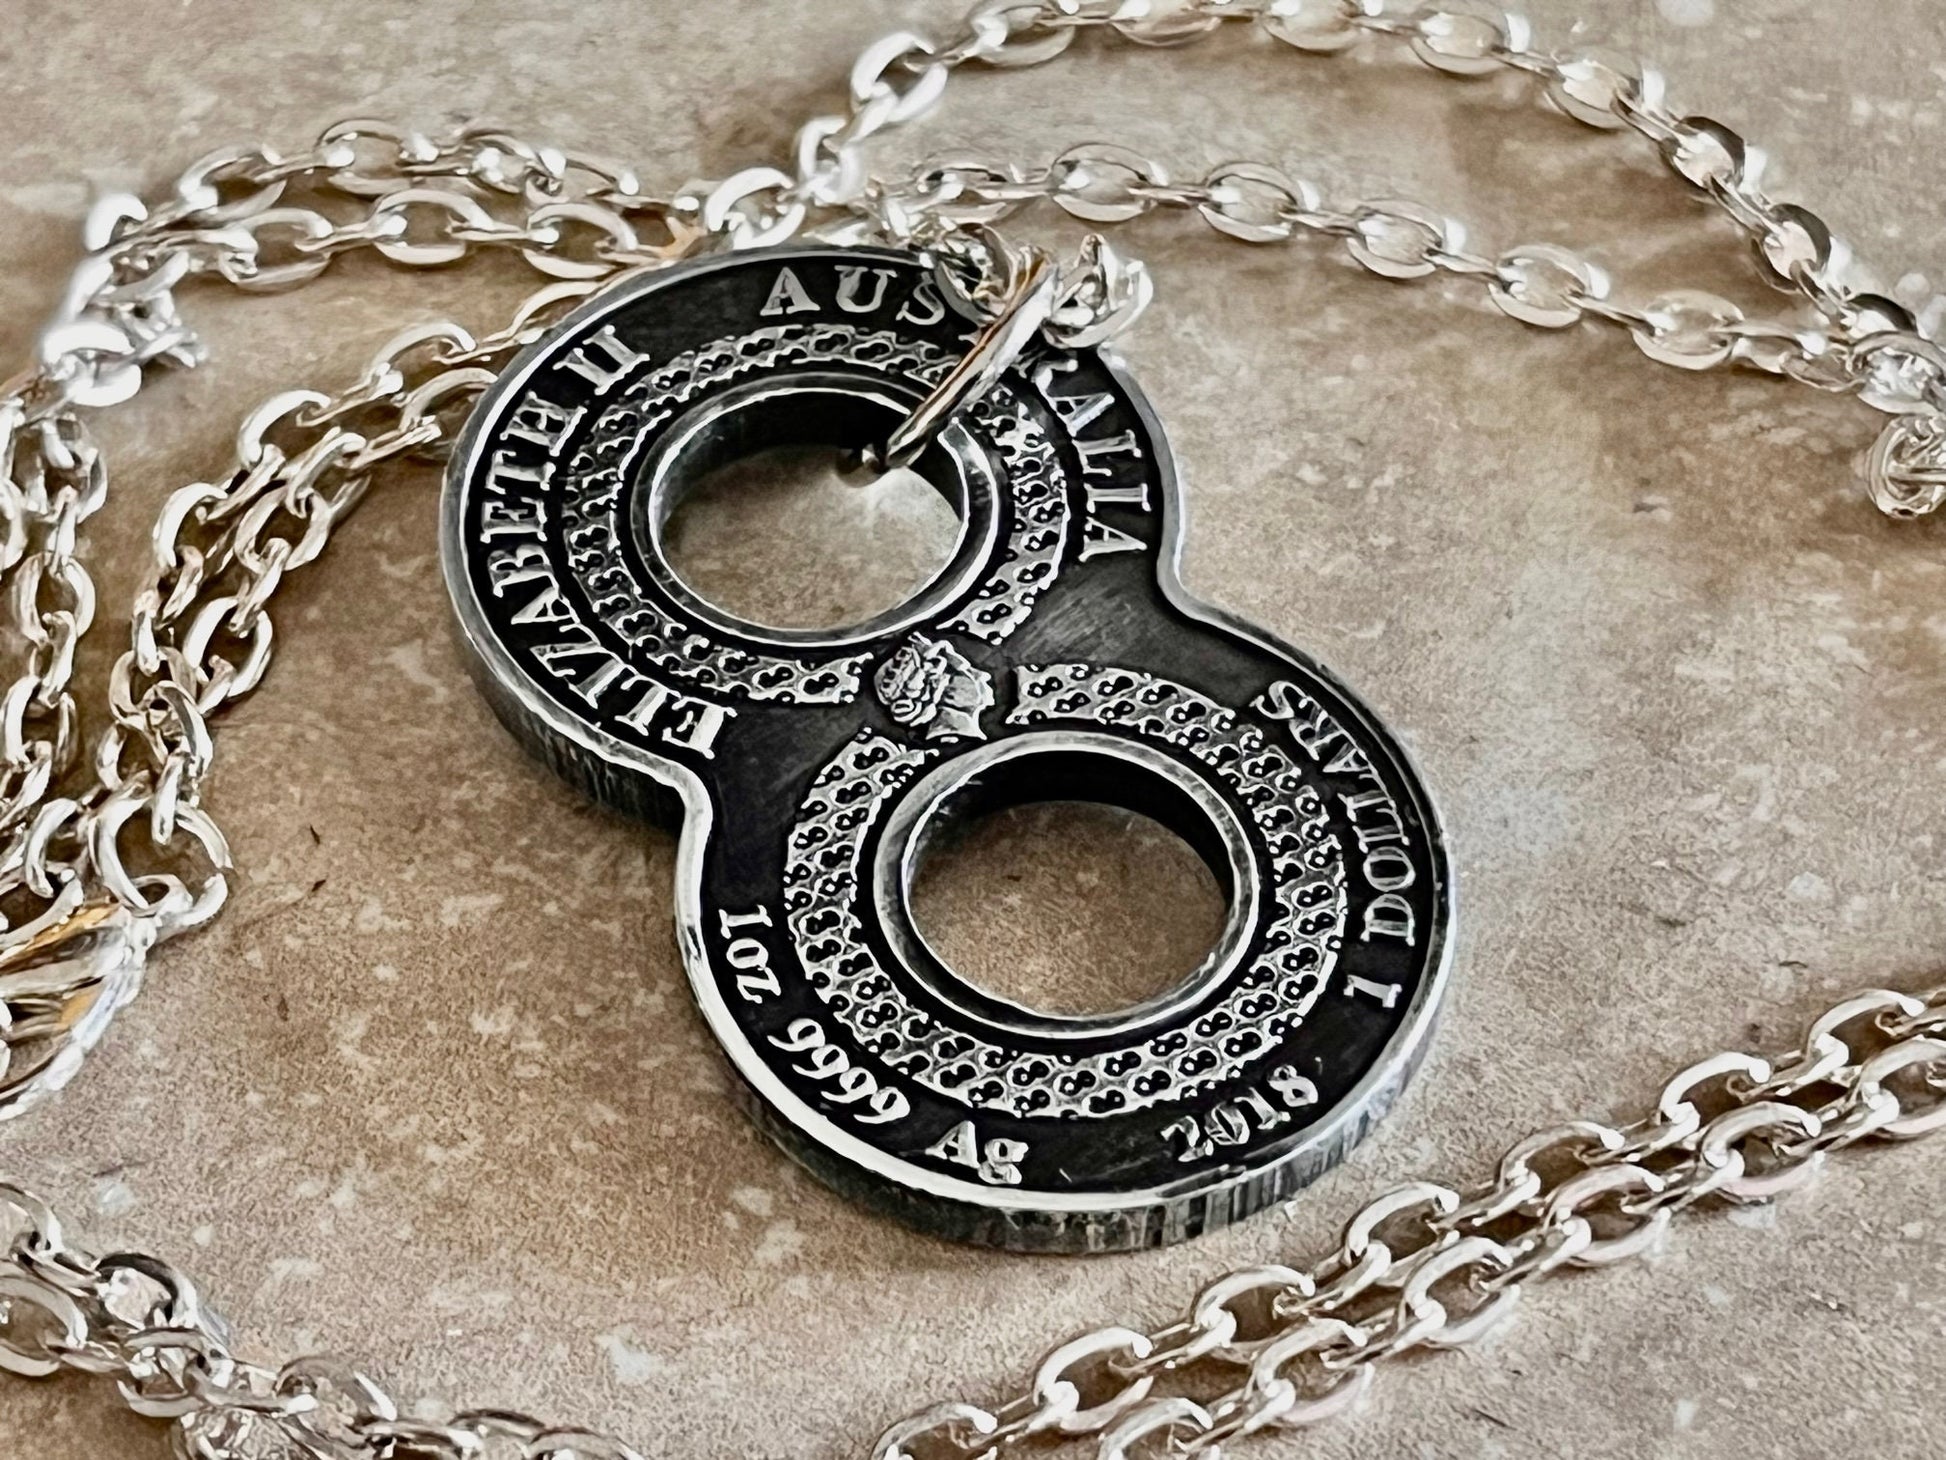 Chinese Lucky Dragon Infinity Dollar Coin Necklace Personal Old Vintage Handmade Jewelry Gift Friend Charm For Him Her World Coin Collector